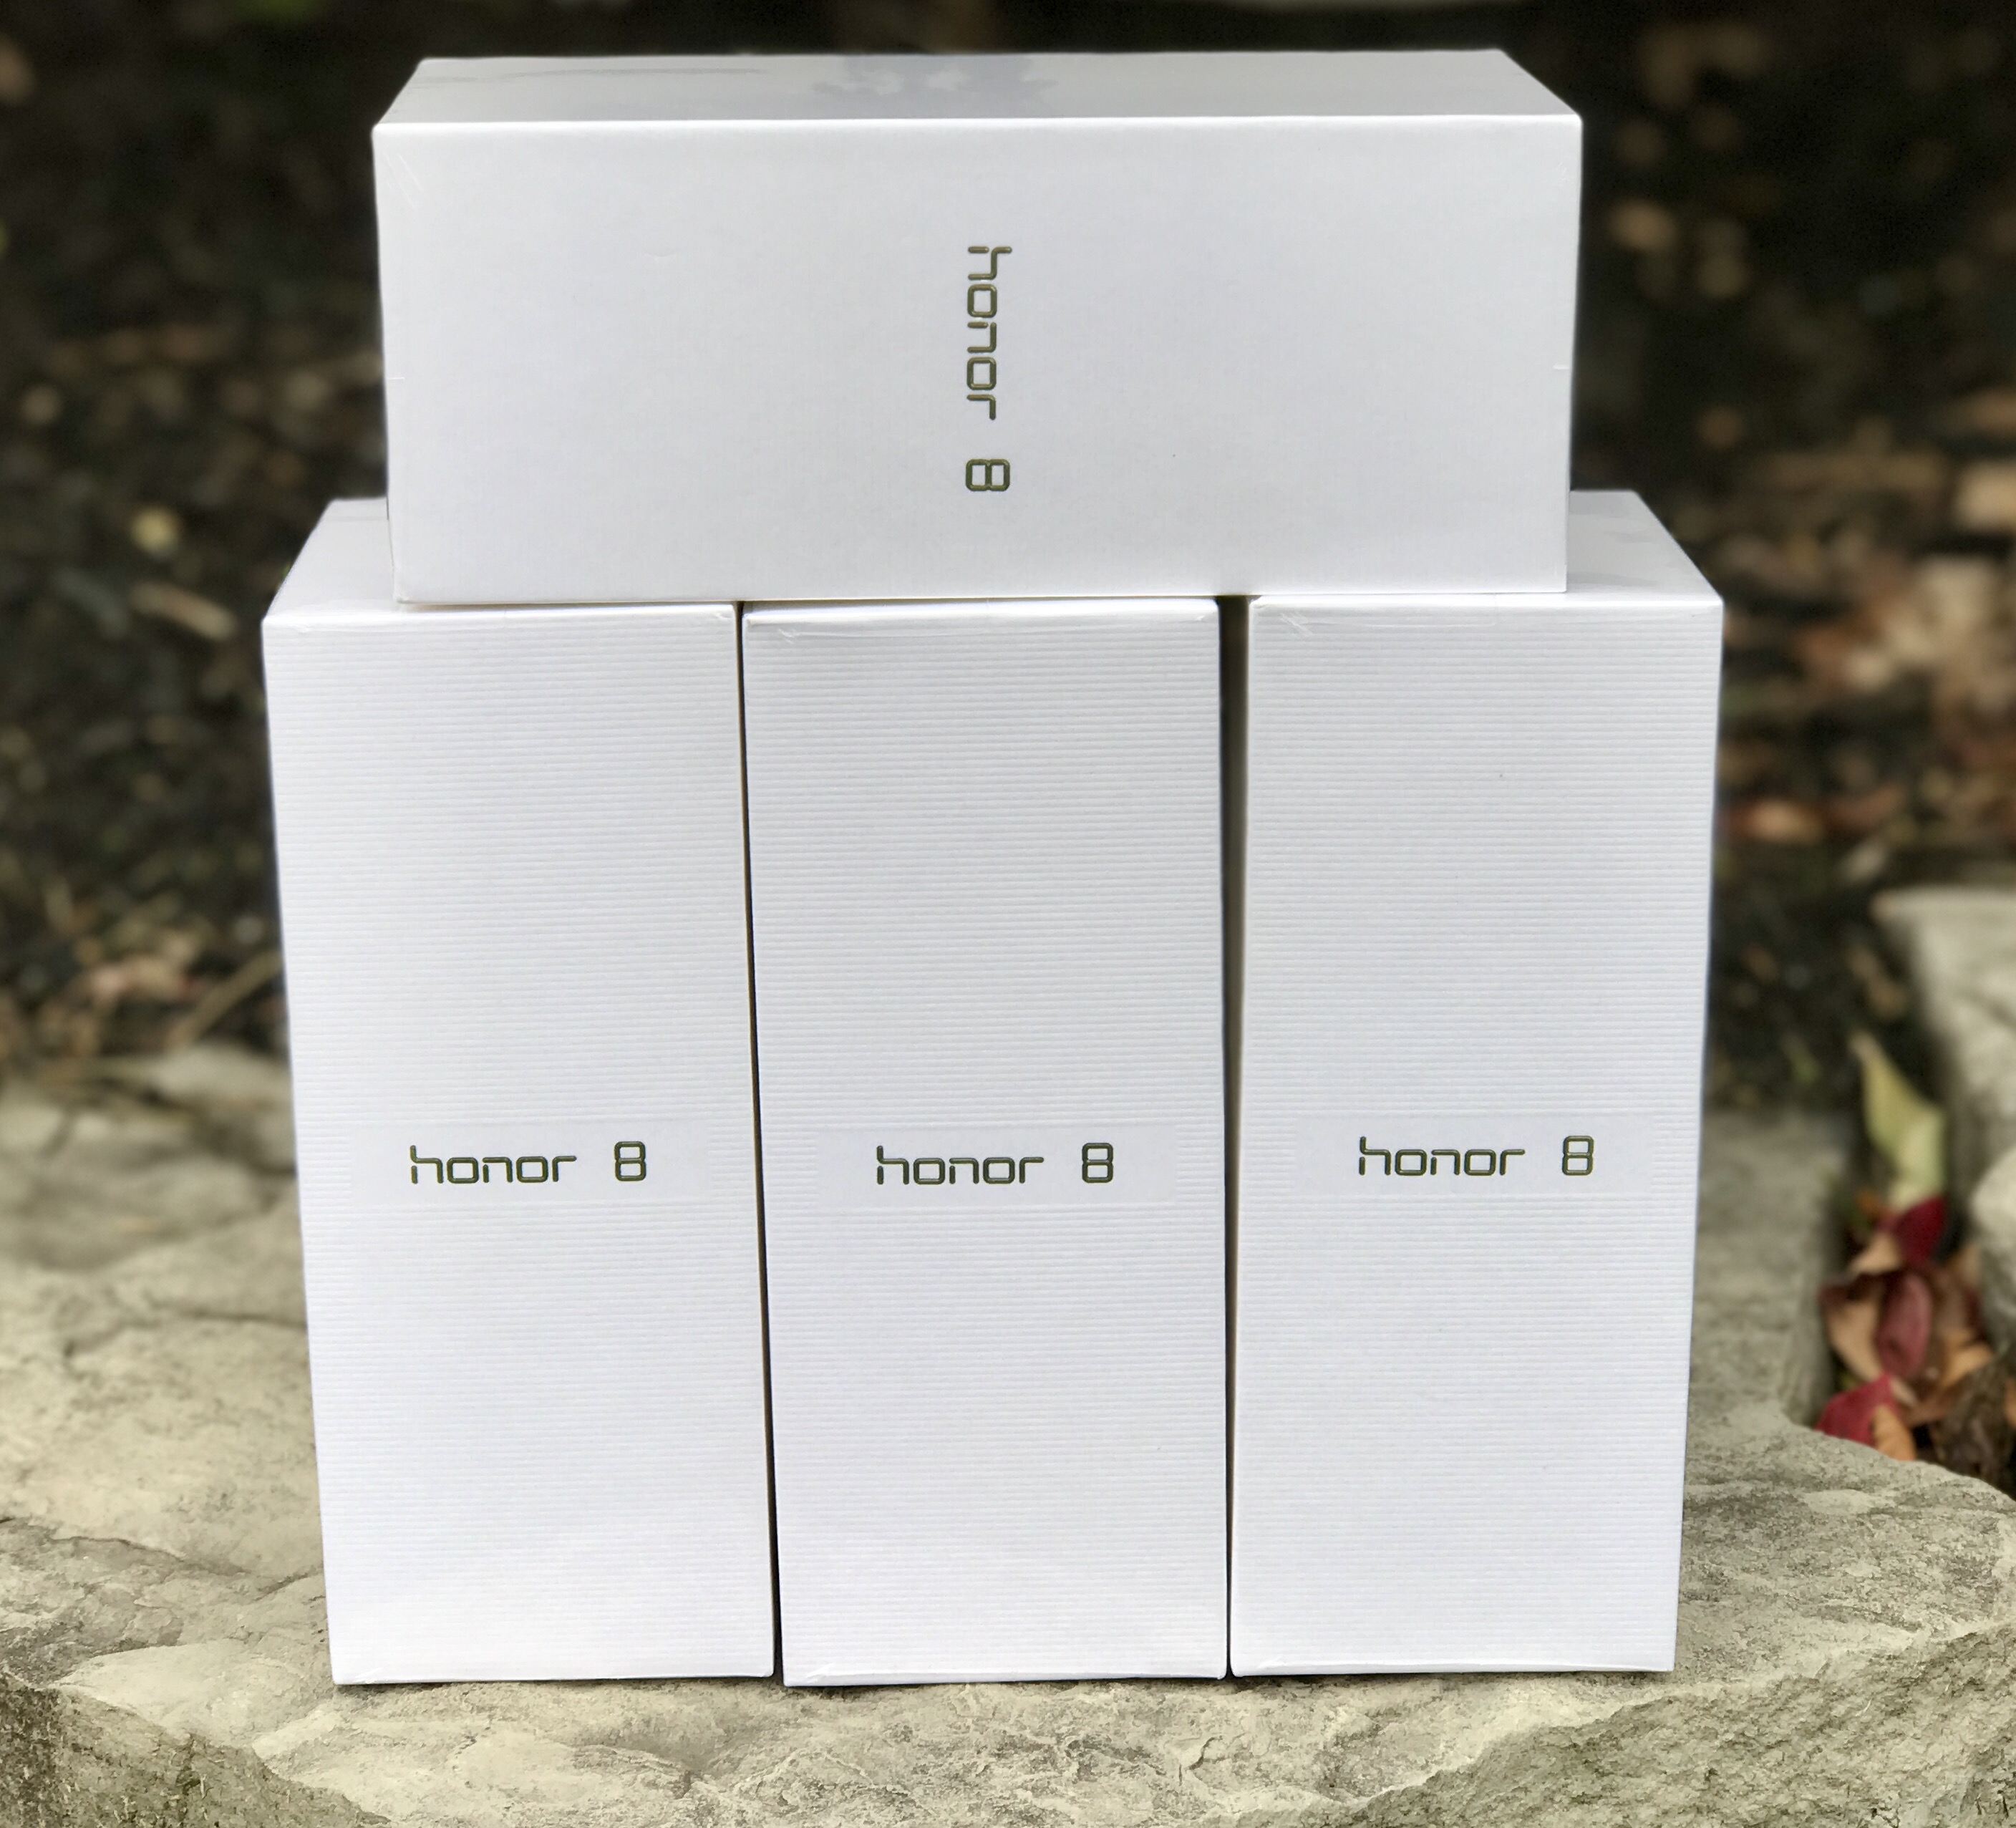 Win a Honor 8 smartphone from Gotta Be Mobile and Newegg.